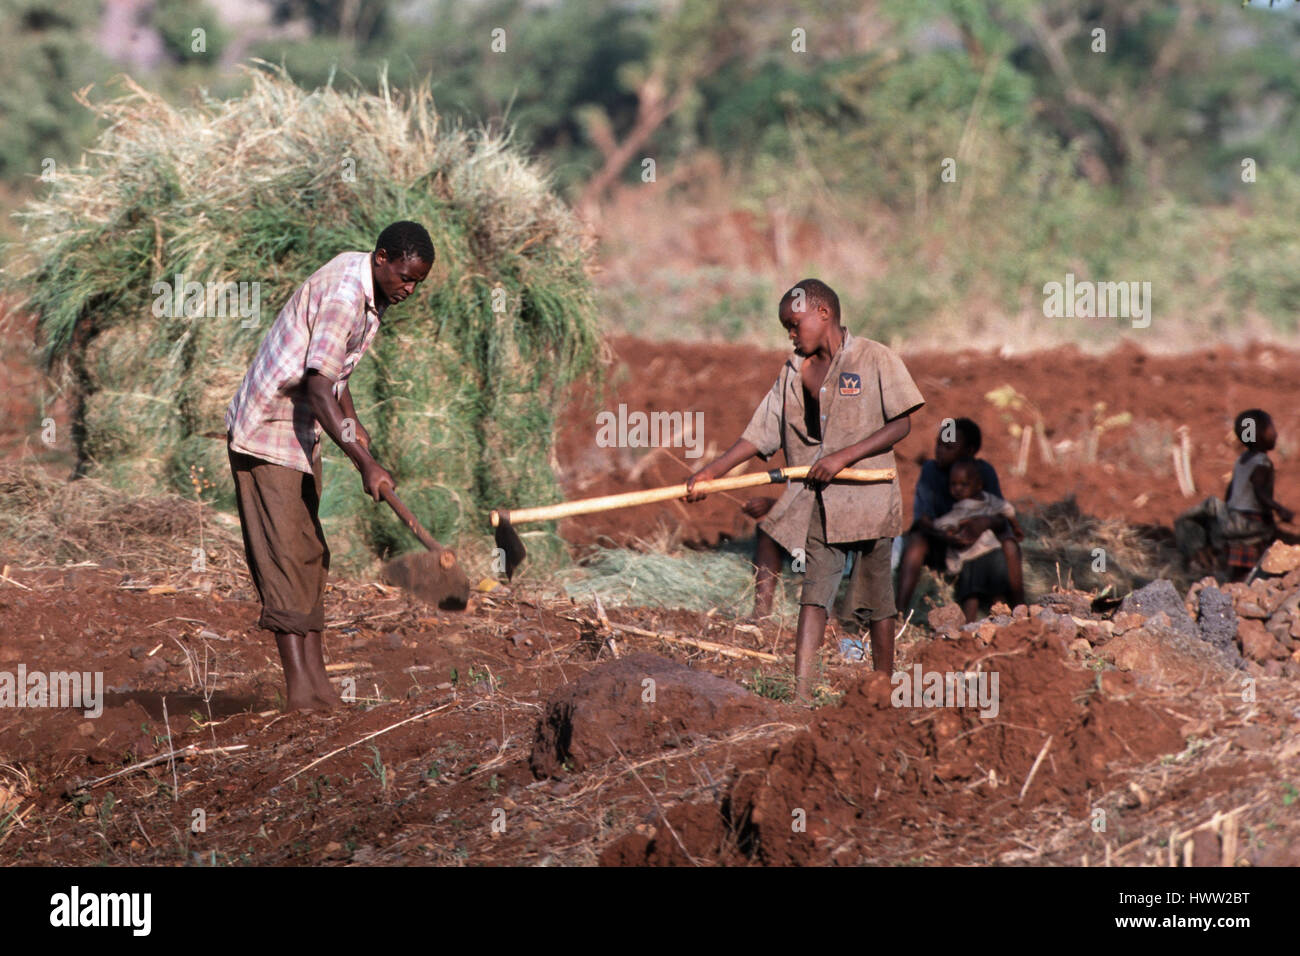 Father and son hoeing a field to plant maize, Moshi, Kilimanjaro region, Tanzania Stock Photo